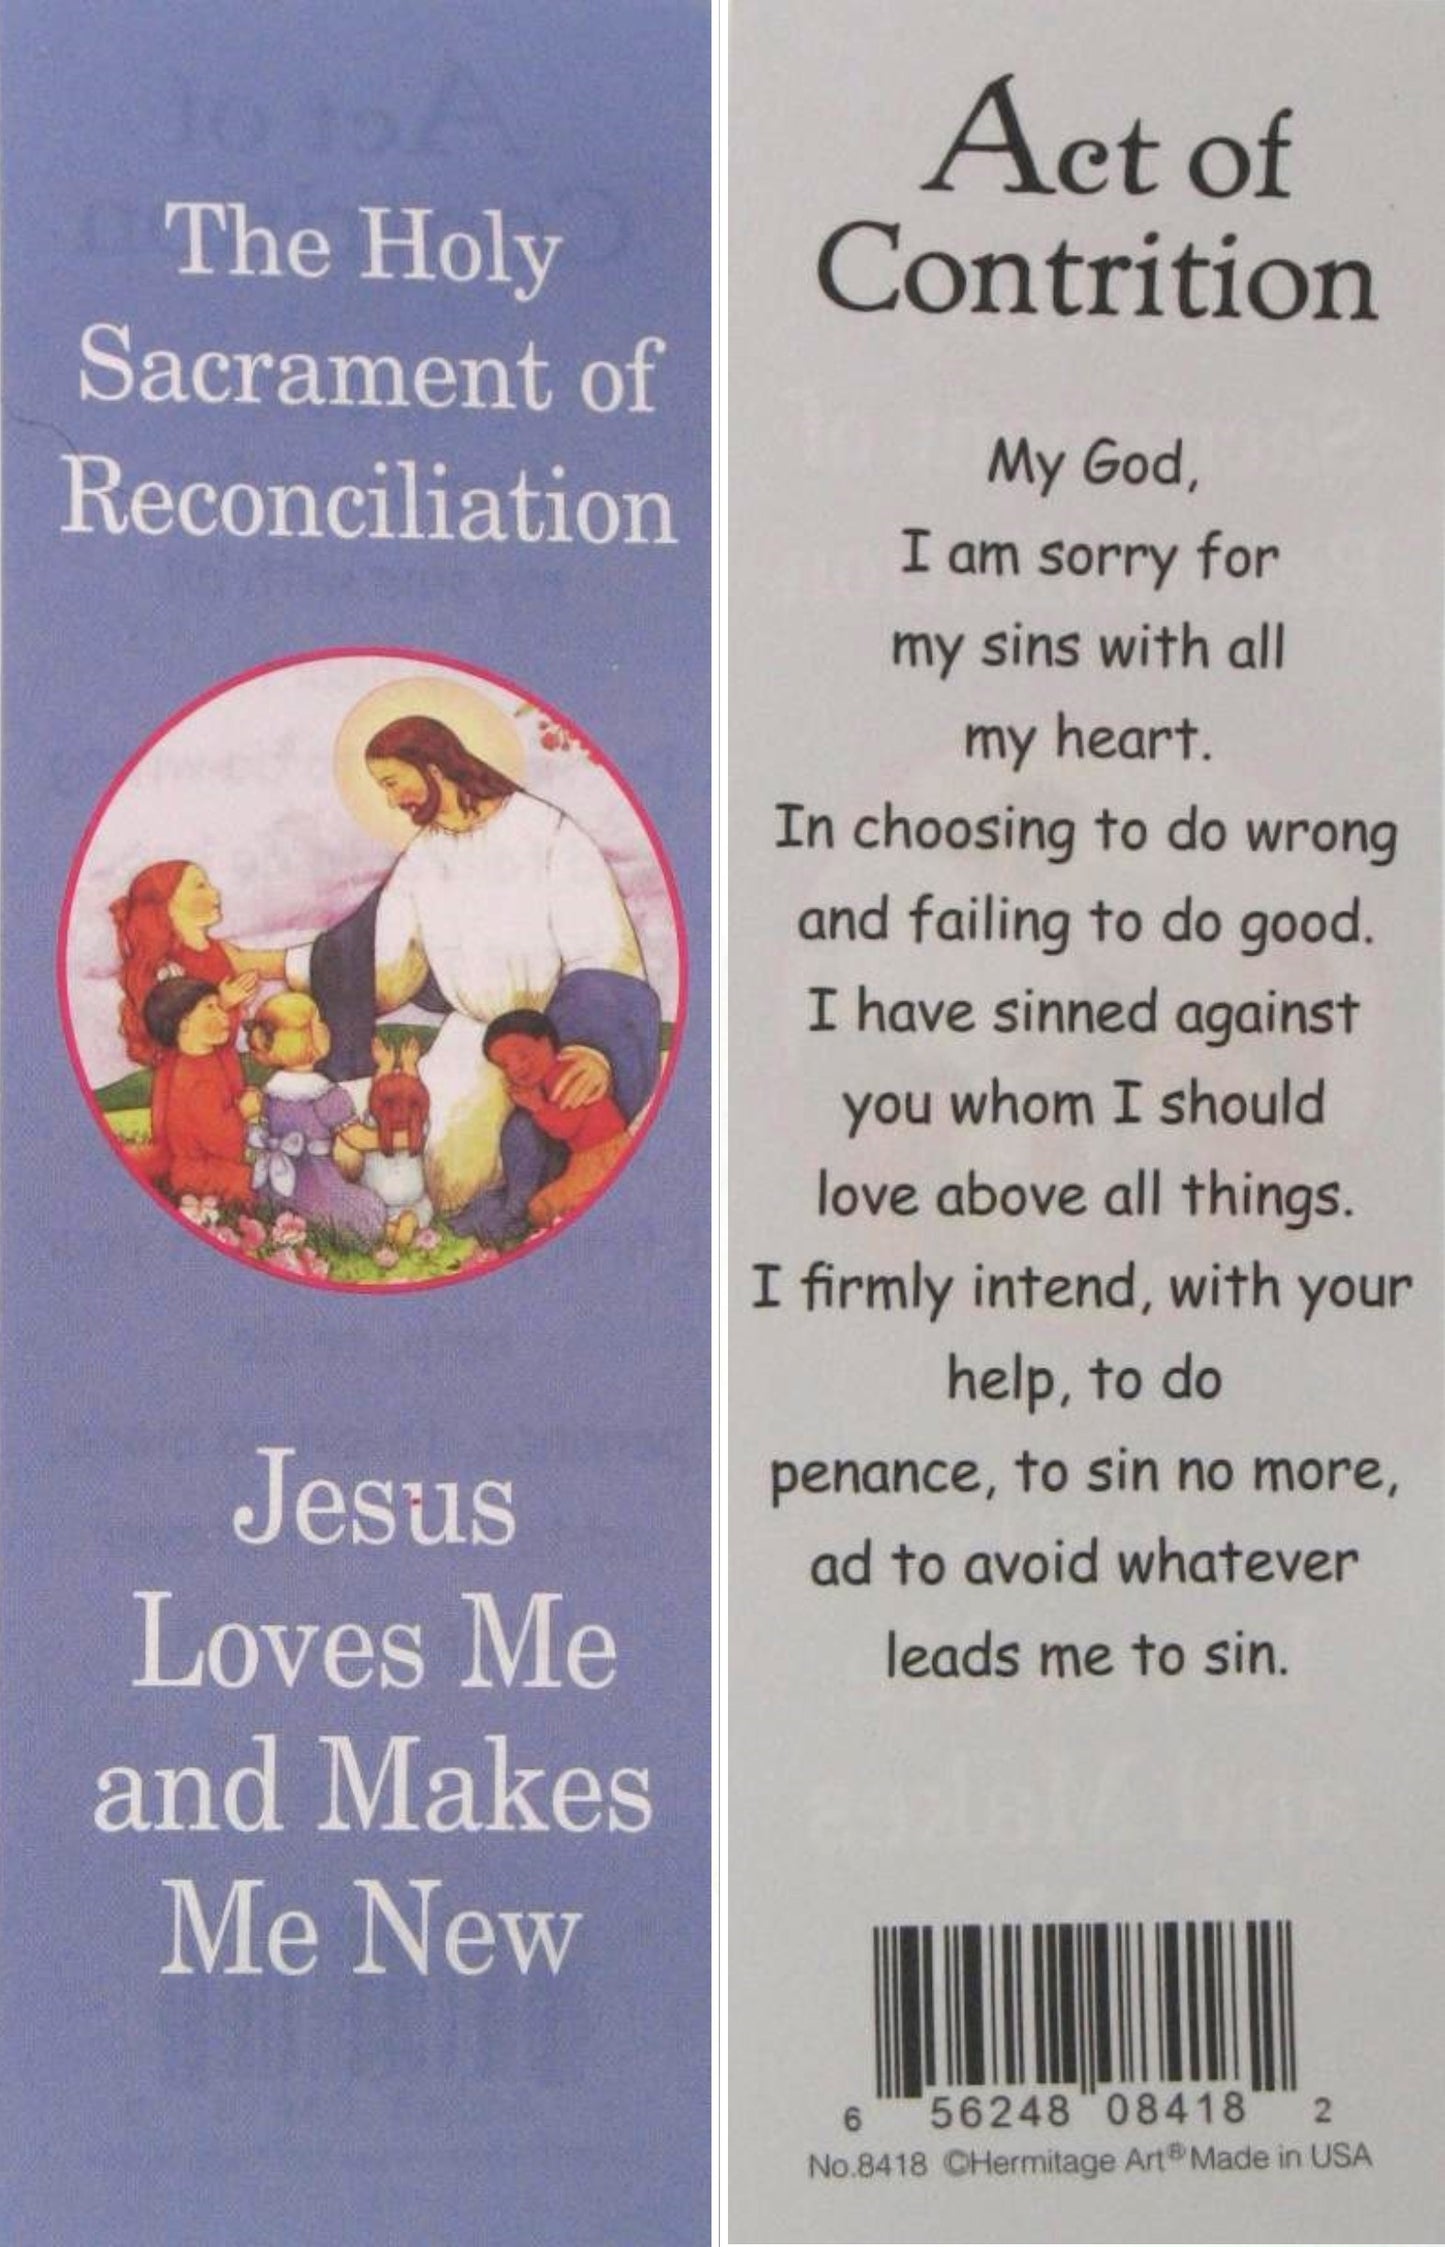 Reconciliation Bookmarks - Act of Contrition